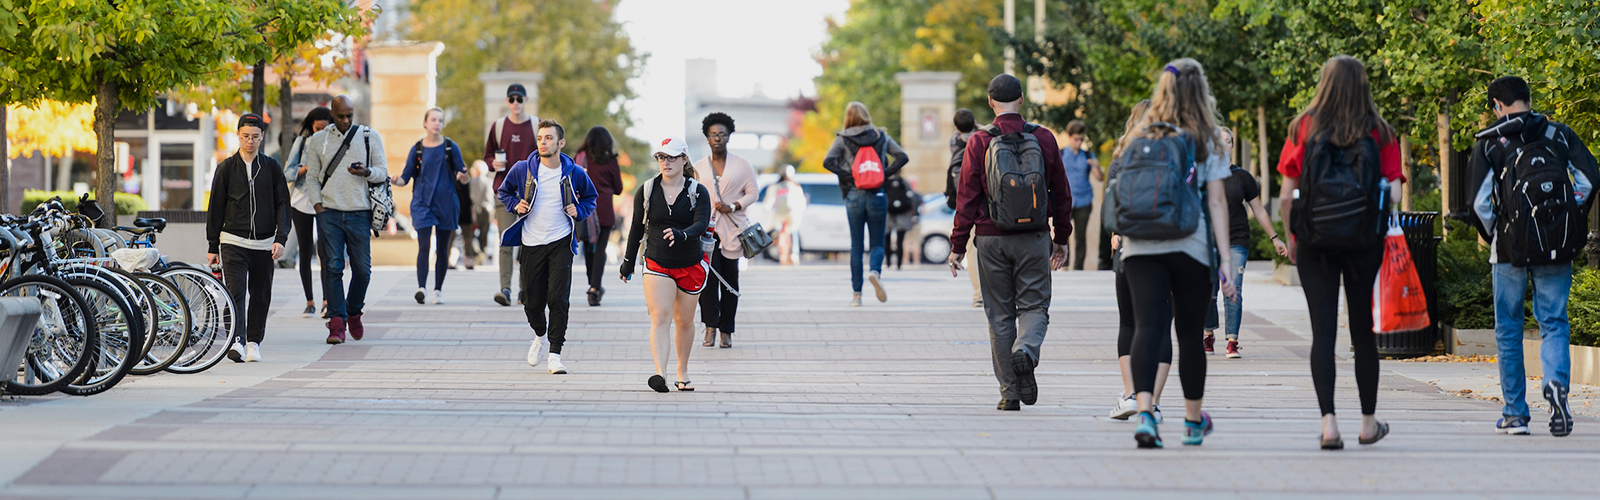 People walking along East Campus Mall